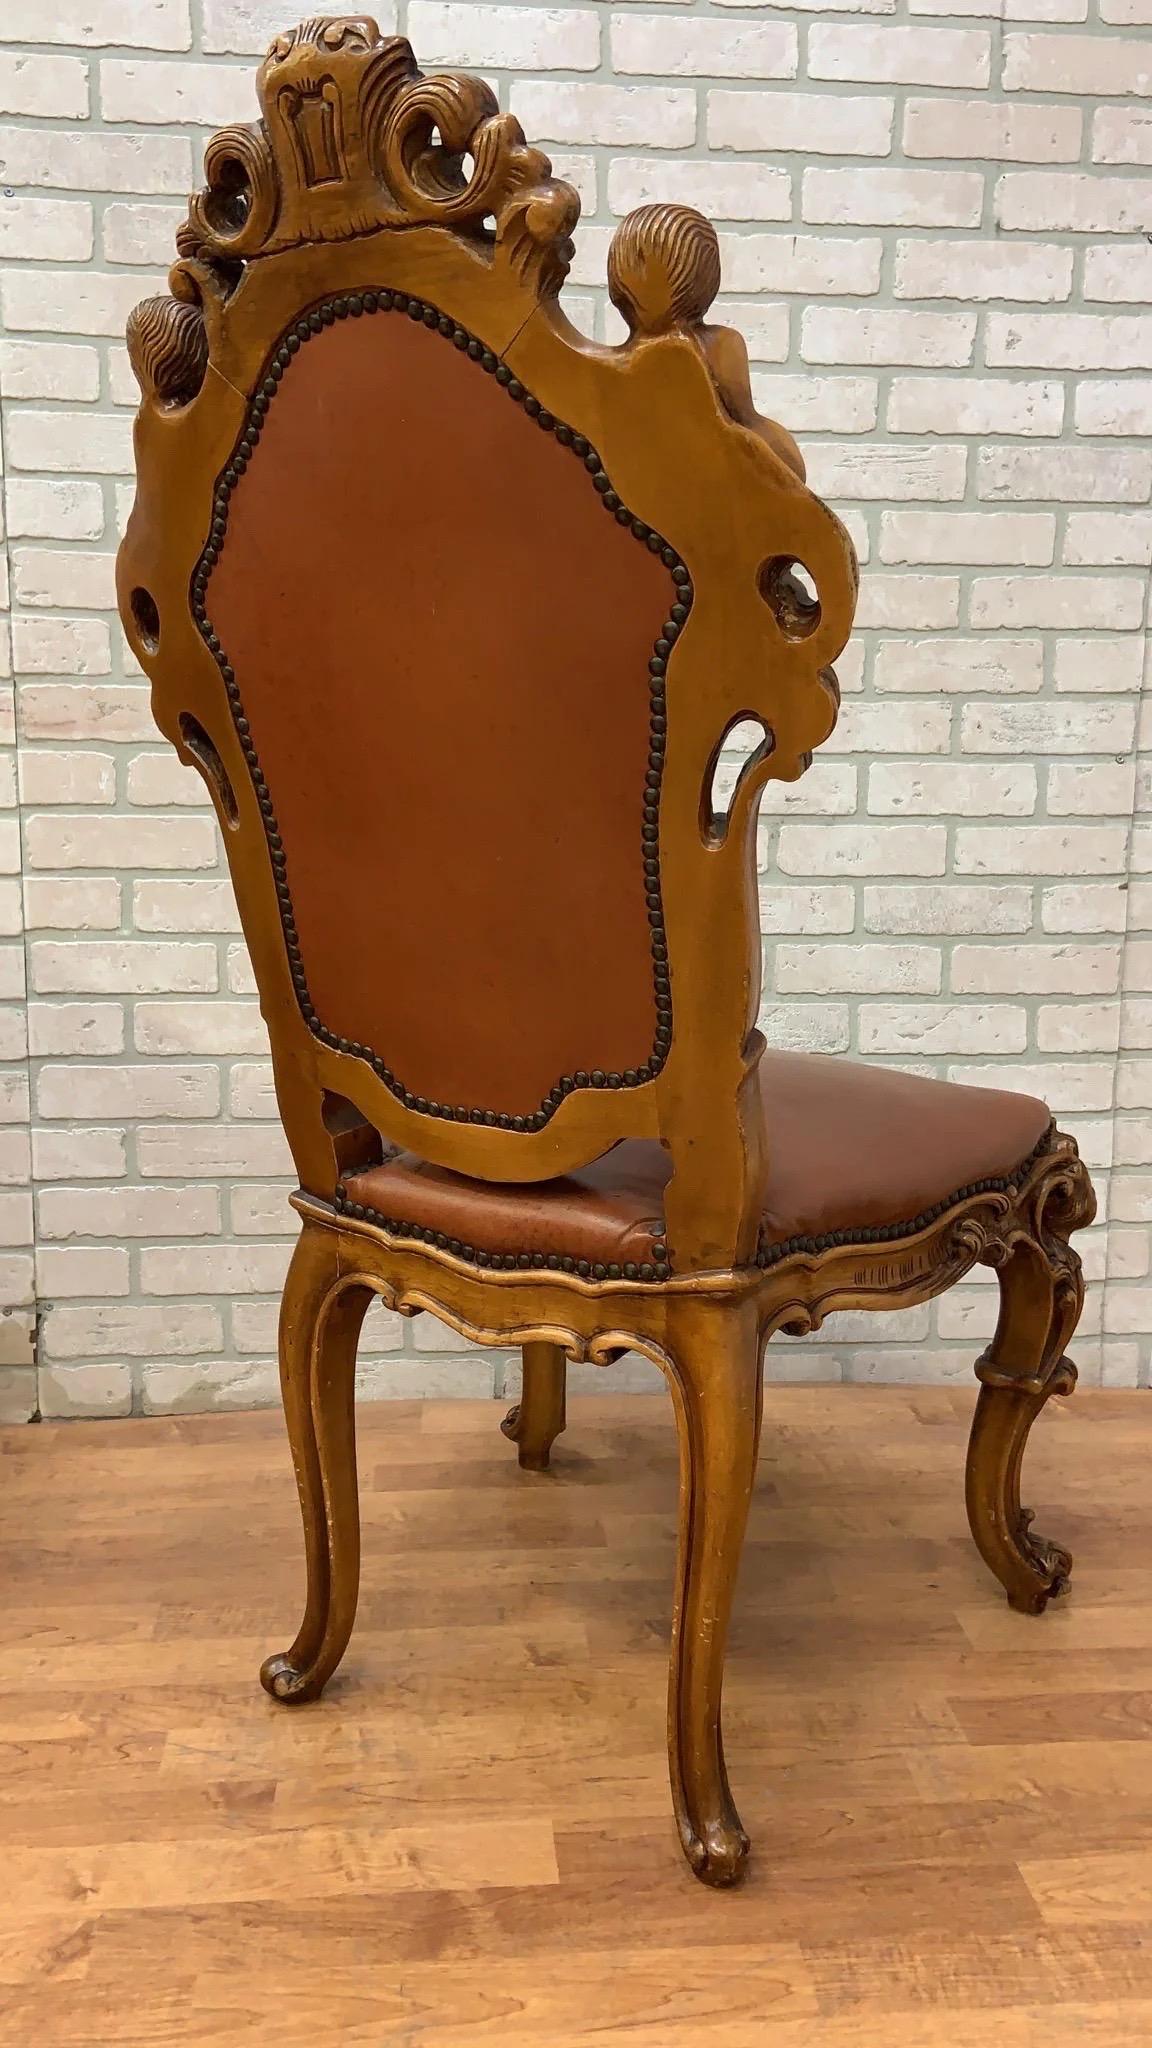 20th Century Antique Italian Rococo Style Carved Dining Chairs in Original Leather -Set of 4 For Sale